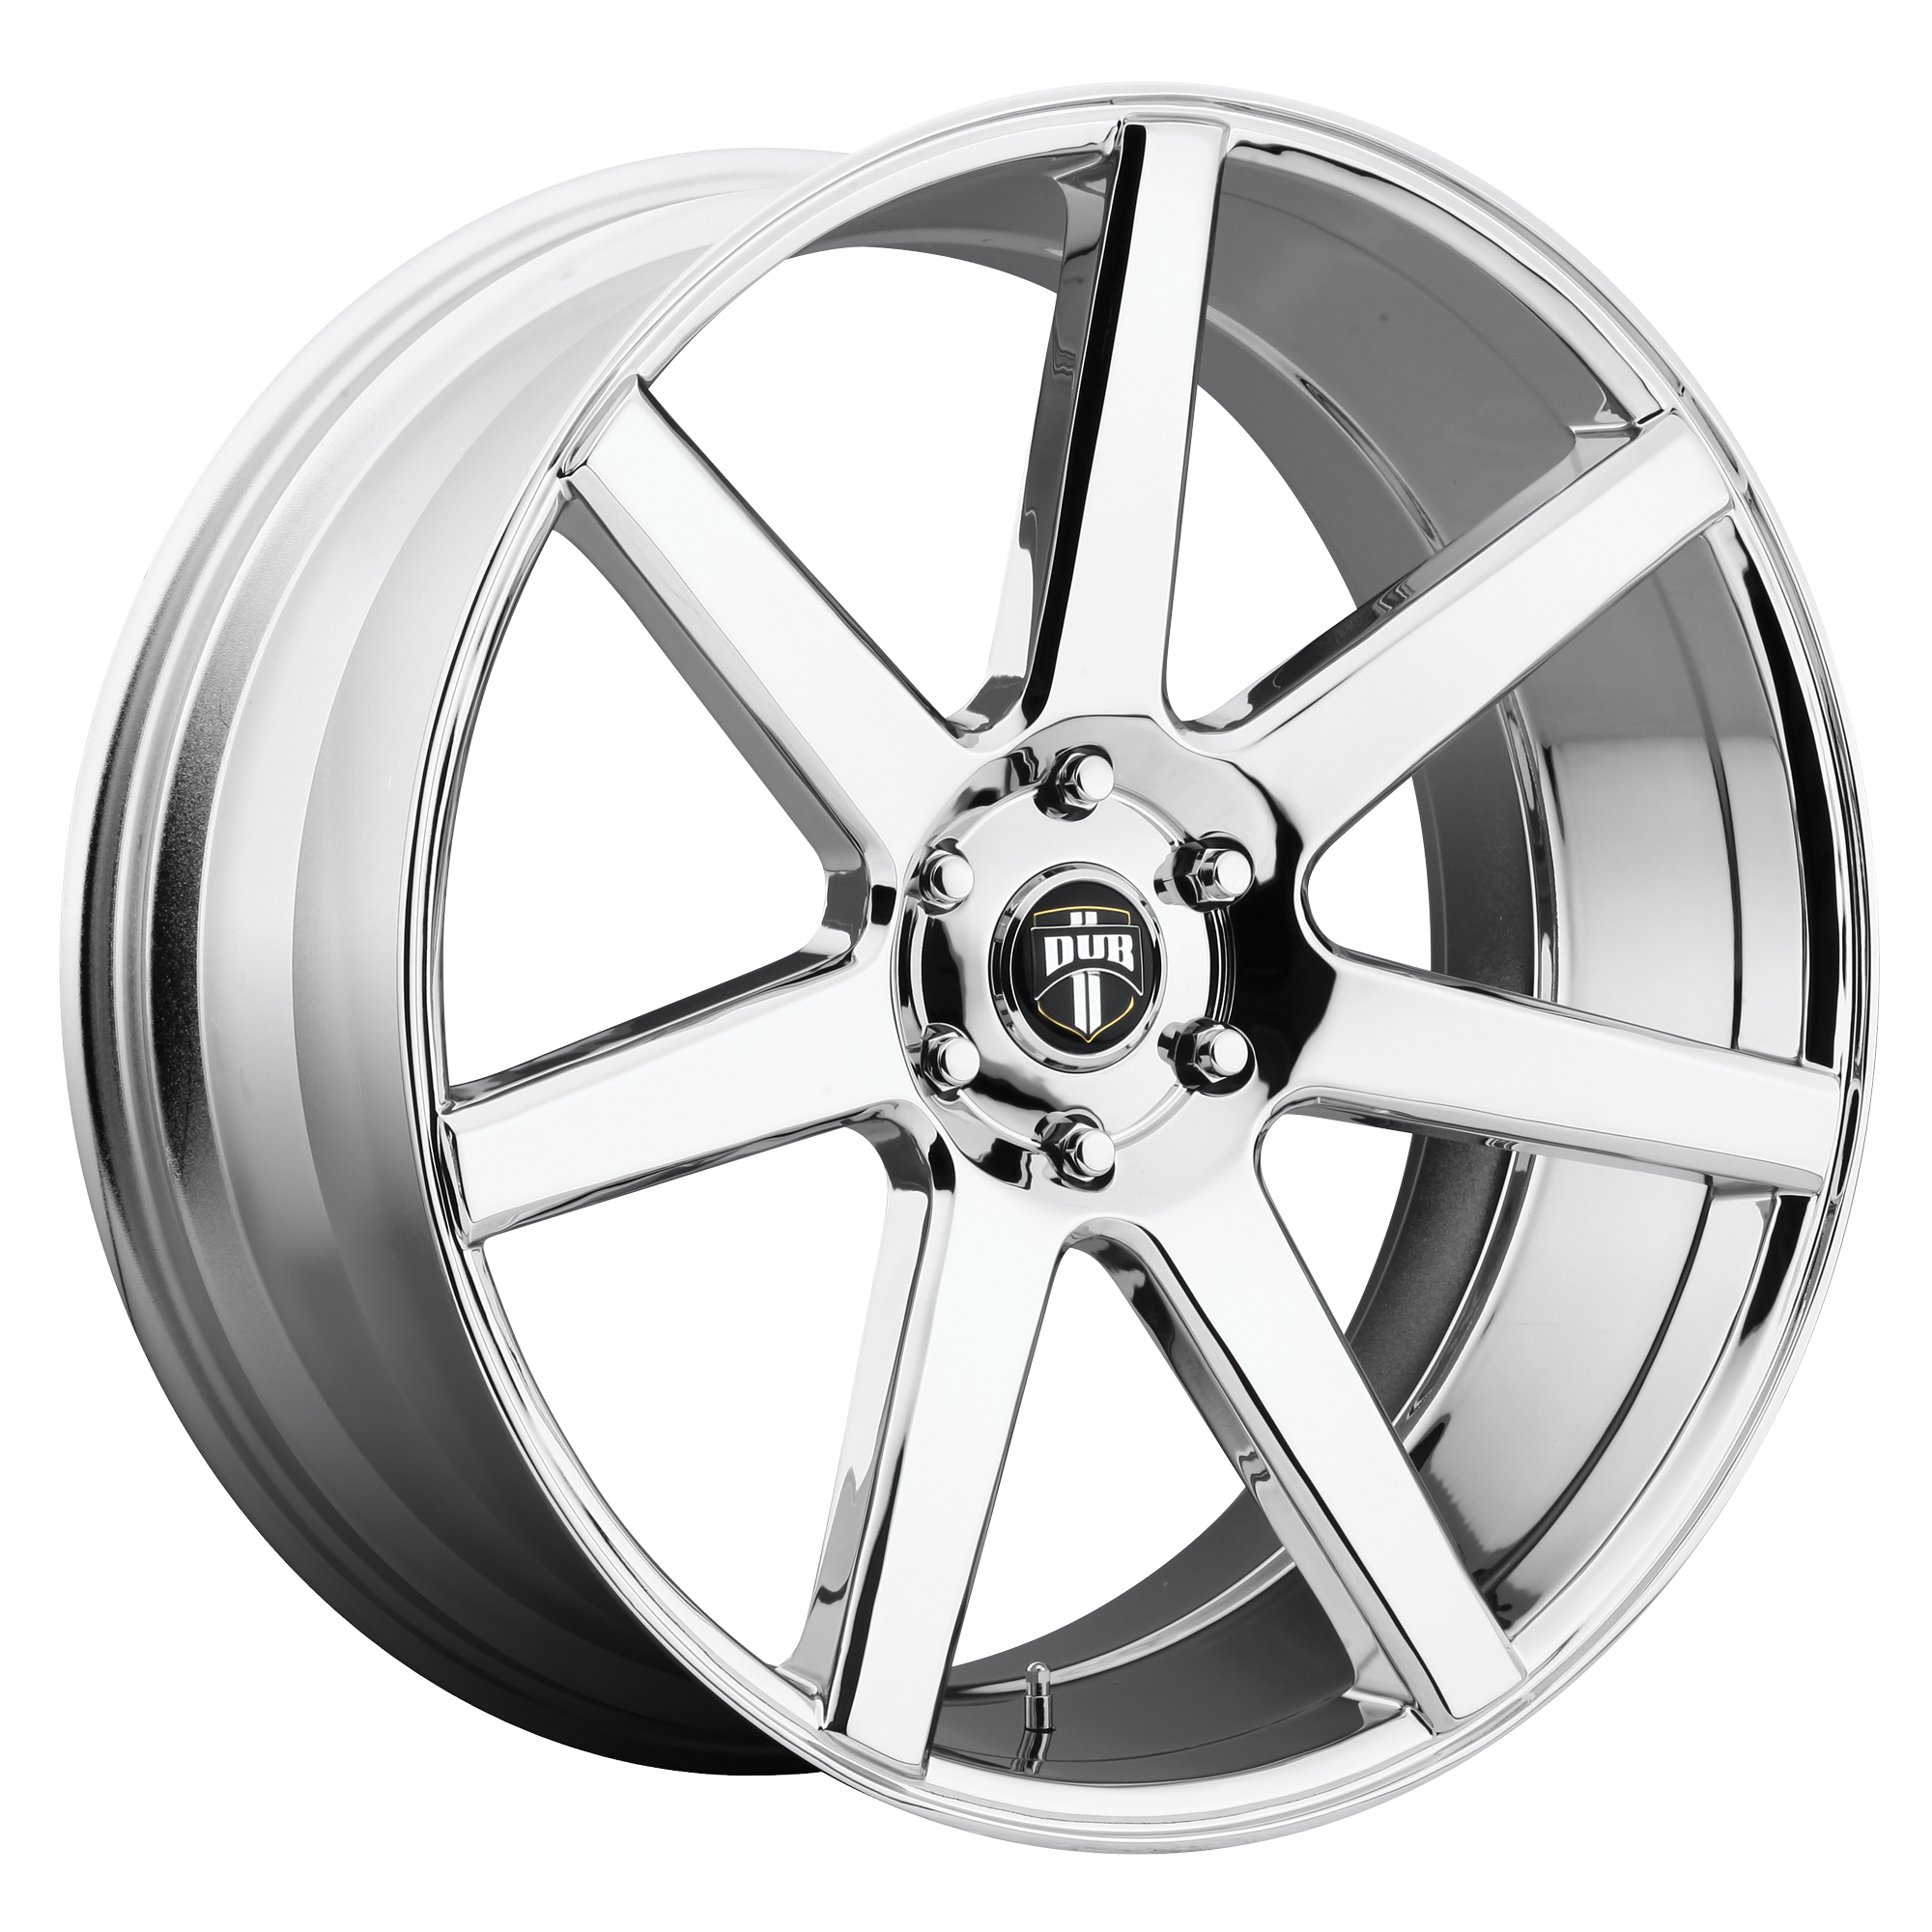 FUTURE 24x10 6x139.70 CHROME PLATED (20 mm) - Tires and Engine Performance